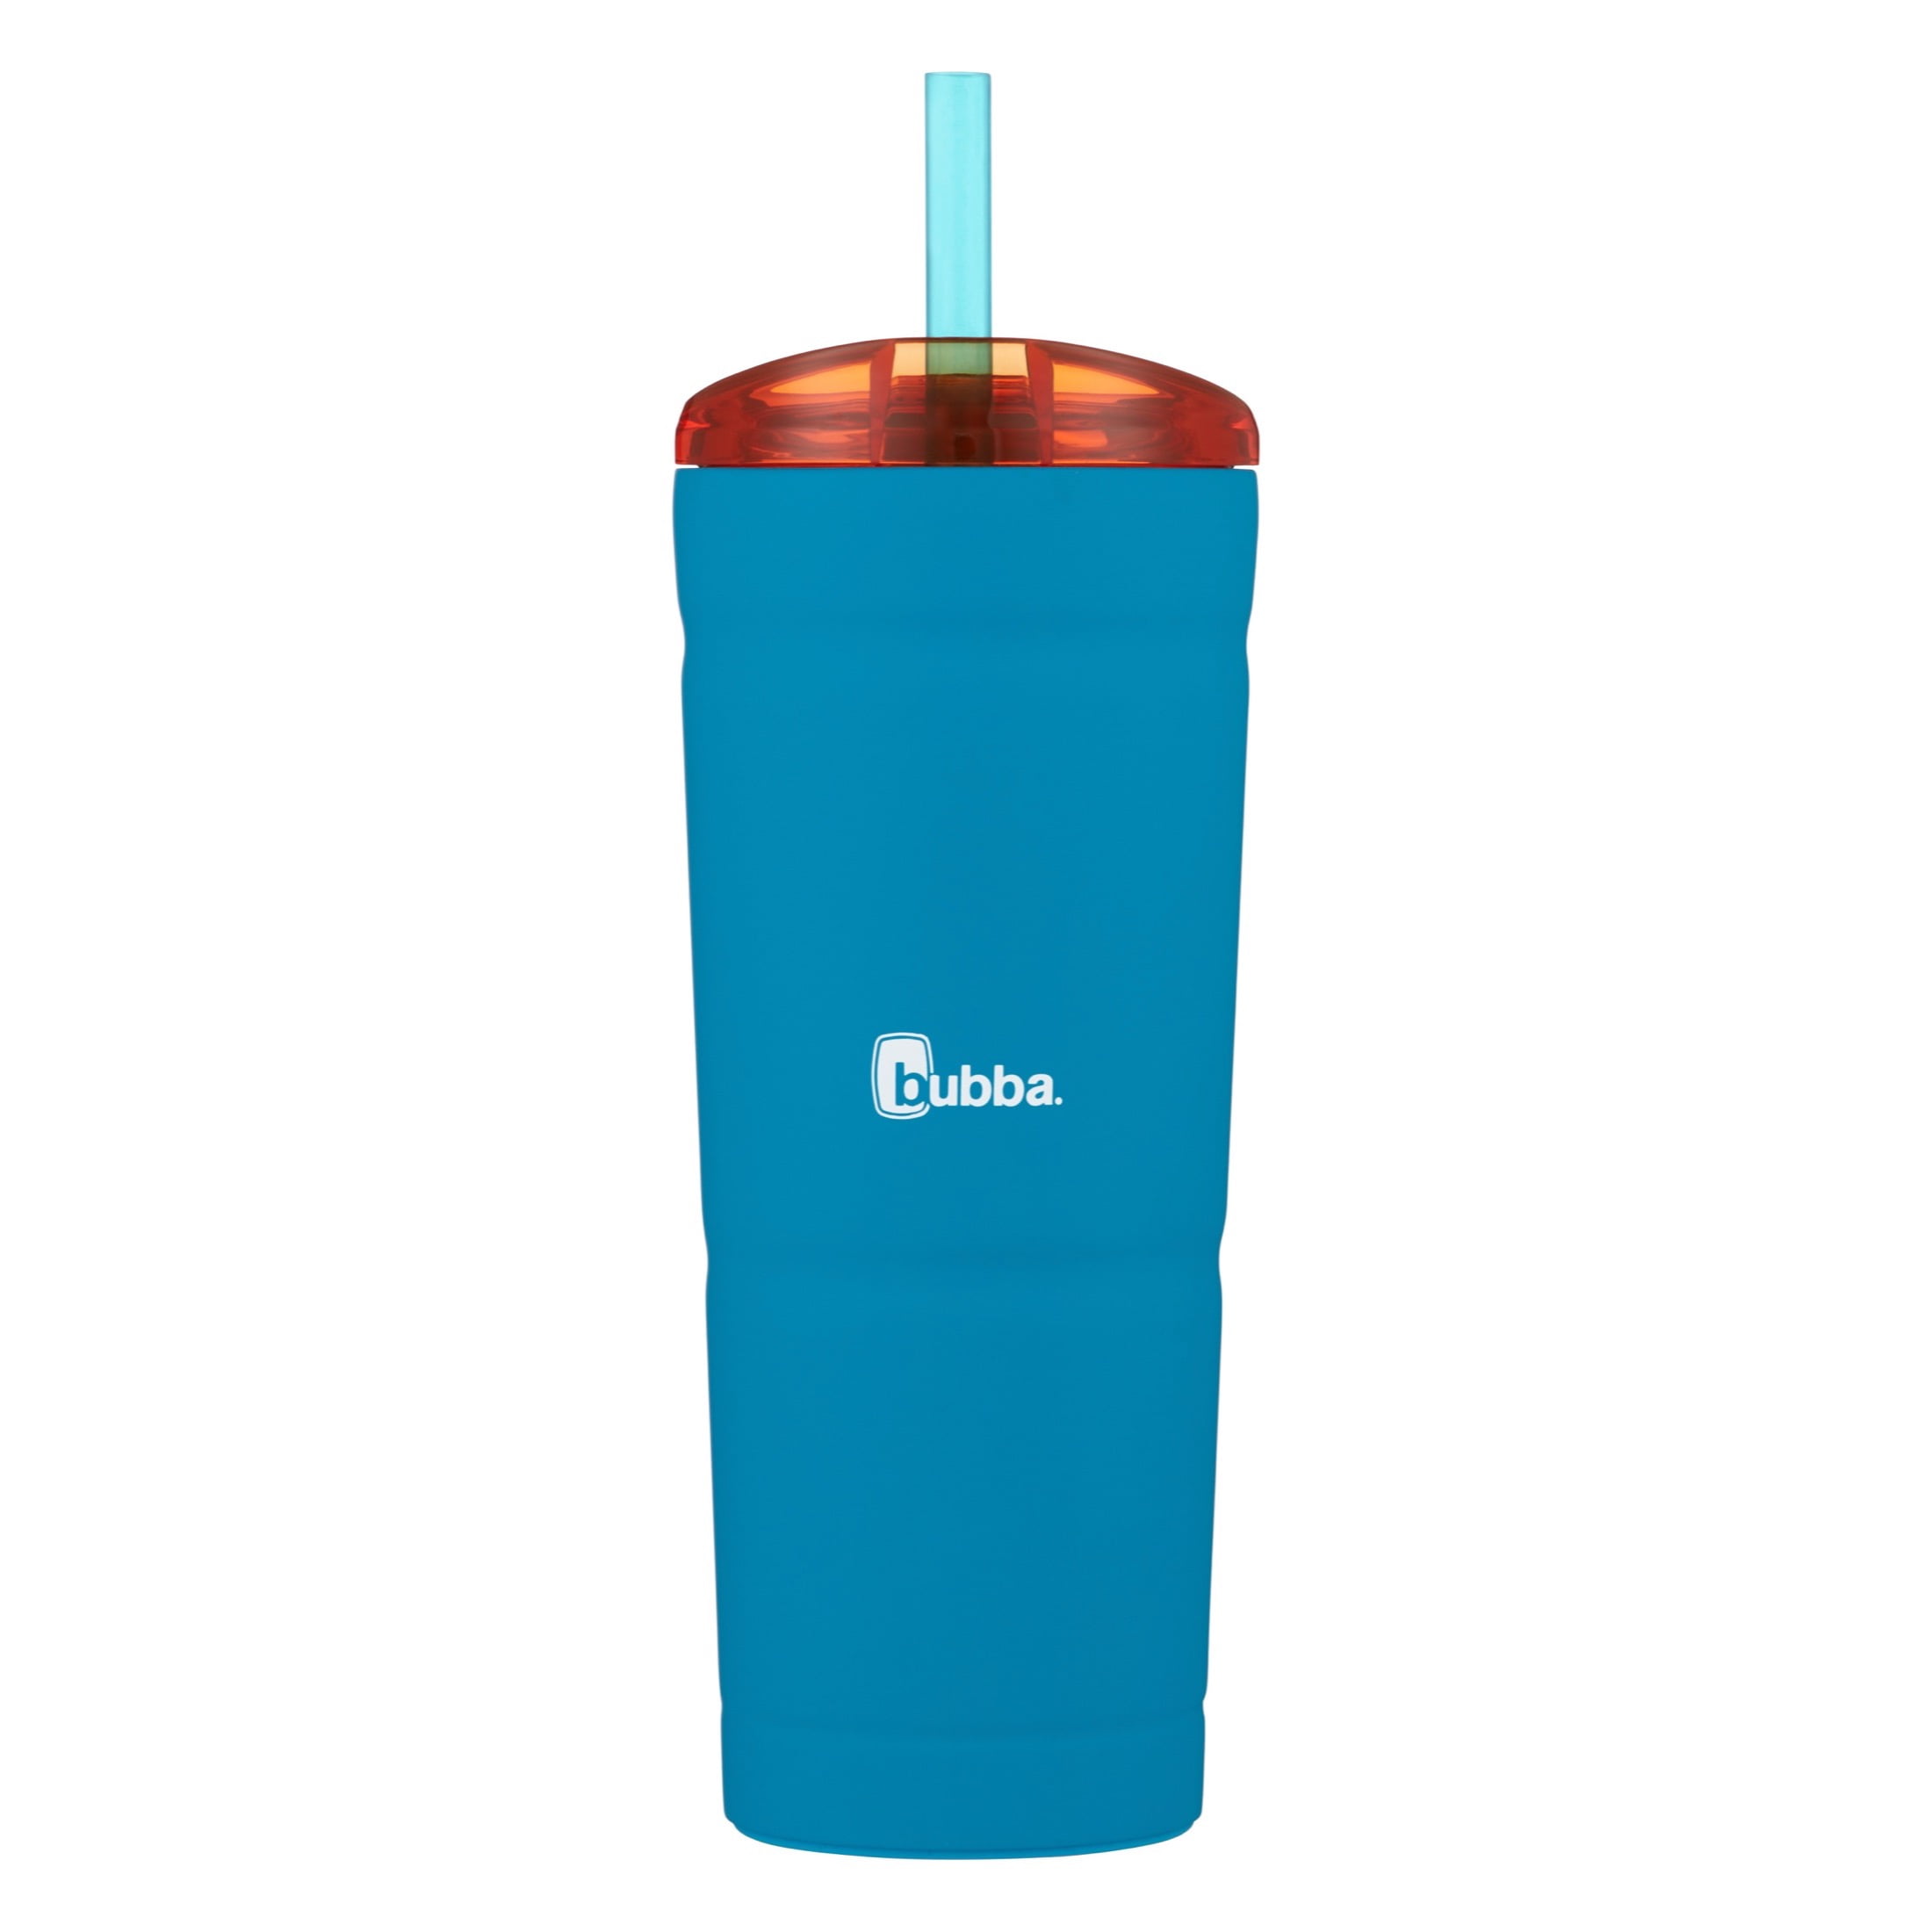 Bubba Envy S Stainless Steel Tumbler w/ Straw, 24 oz - Island Teal